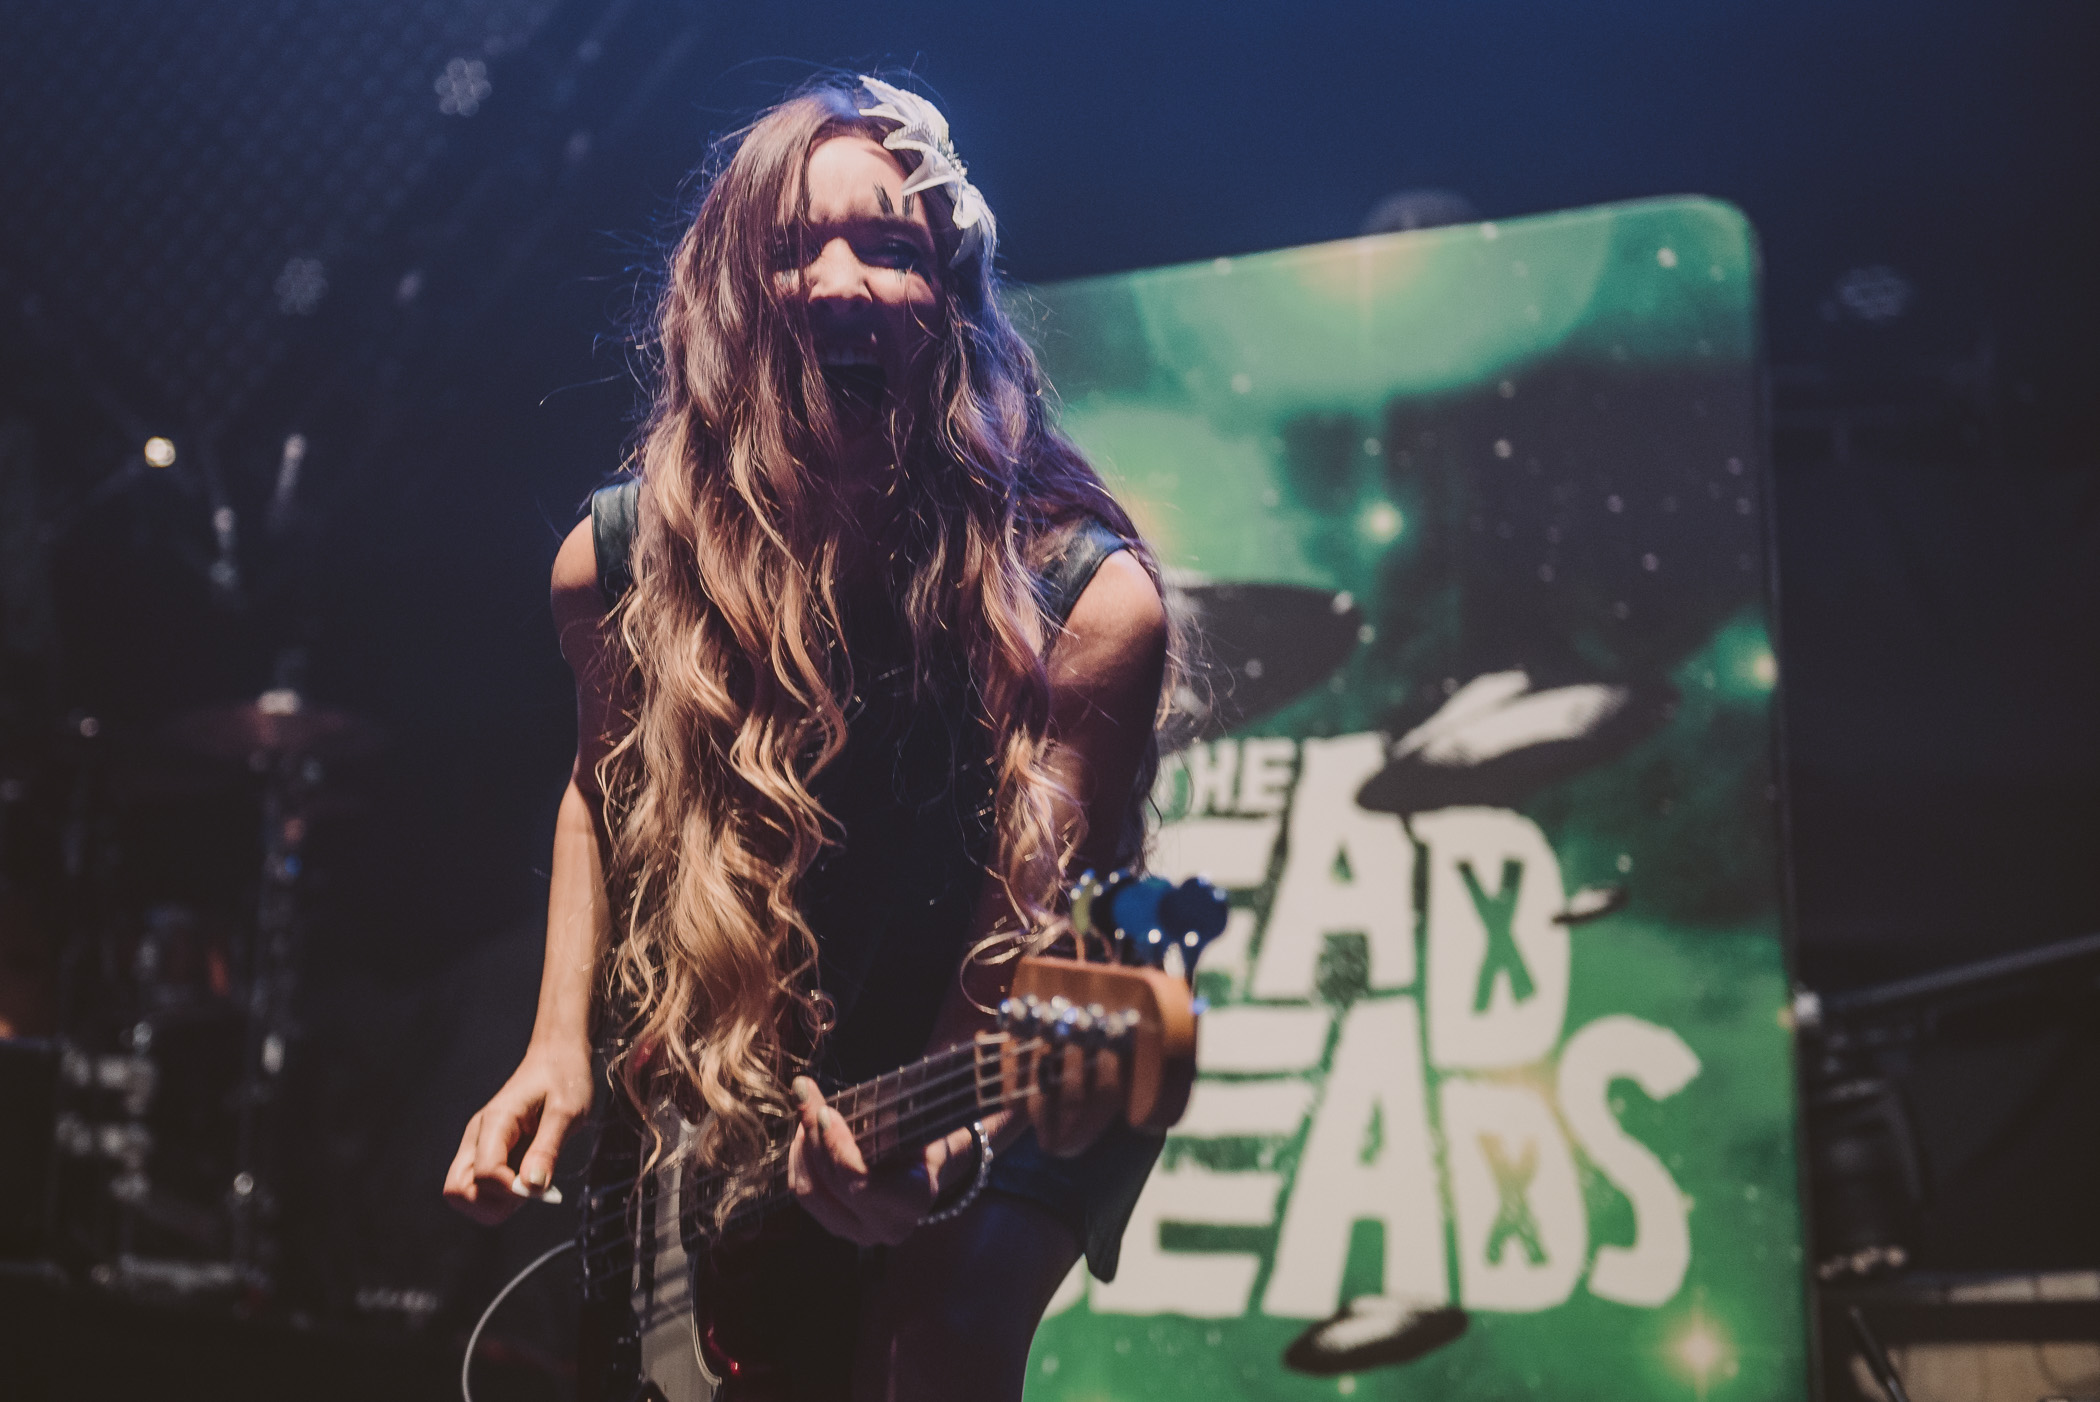 3_The_Dead_Deads-Abbotsford_Centre-Timothy_Nguyen-20180127 (9 of 15).jpg